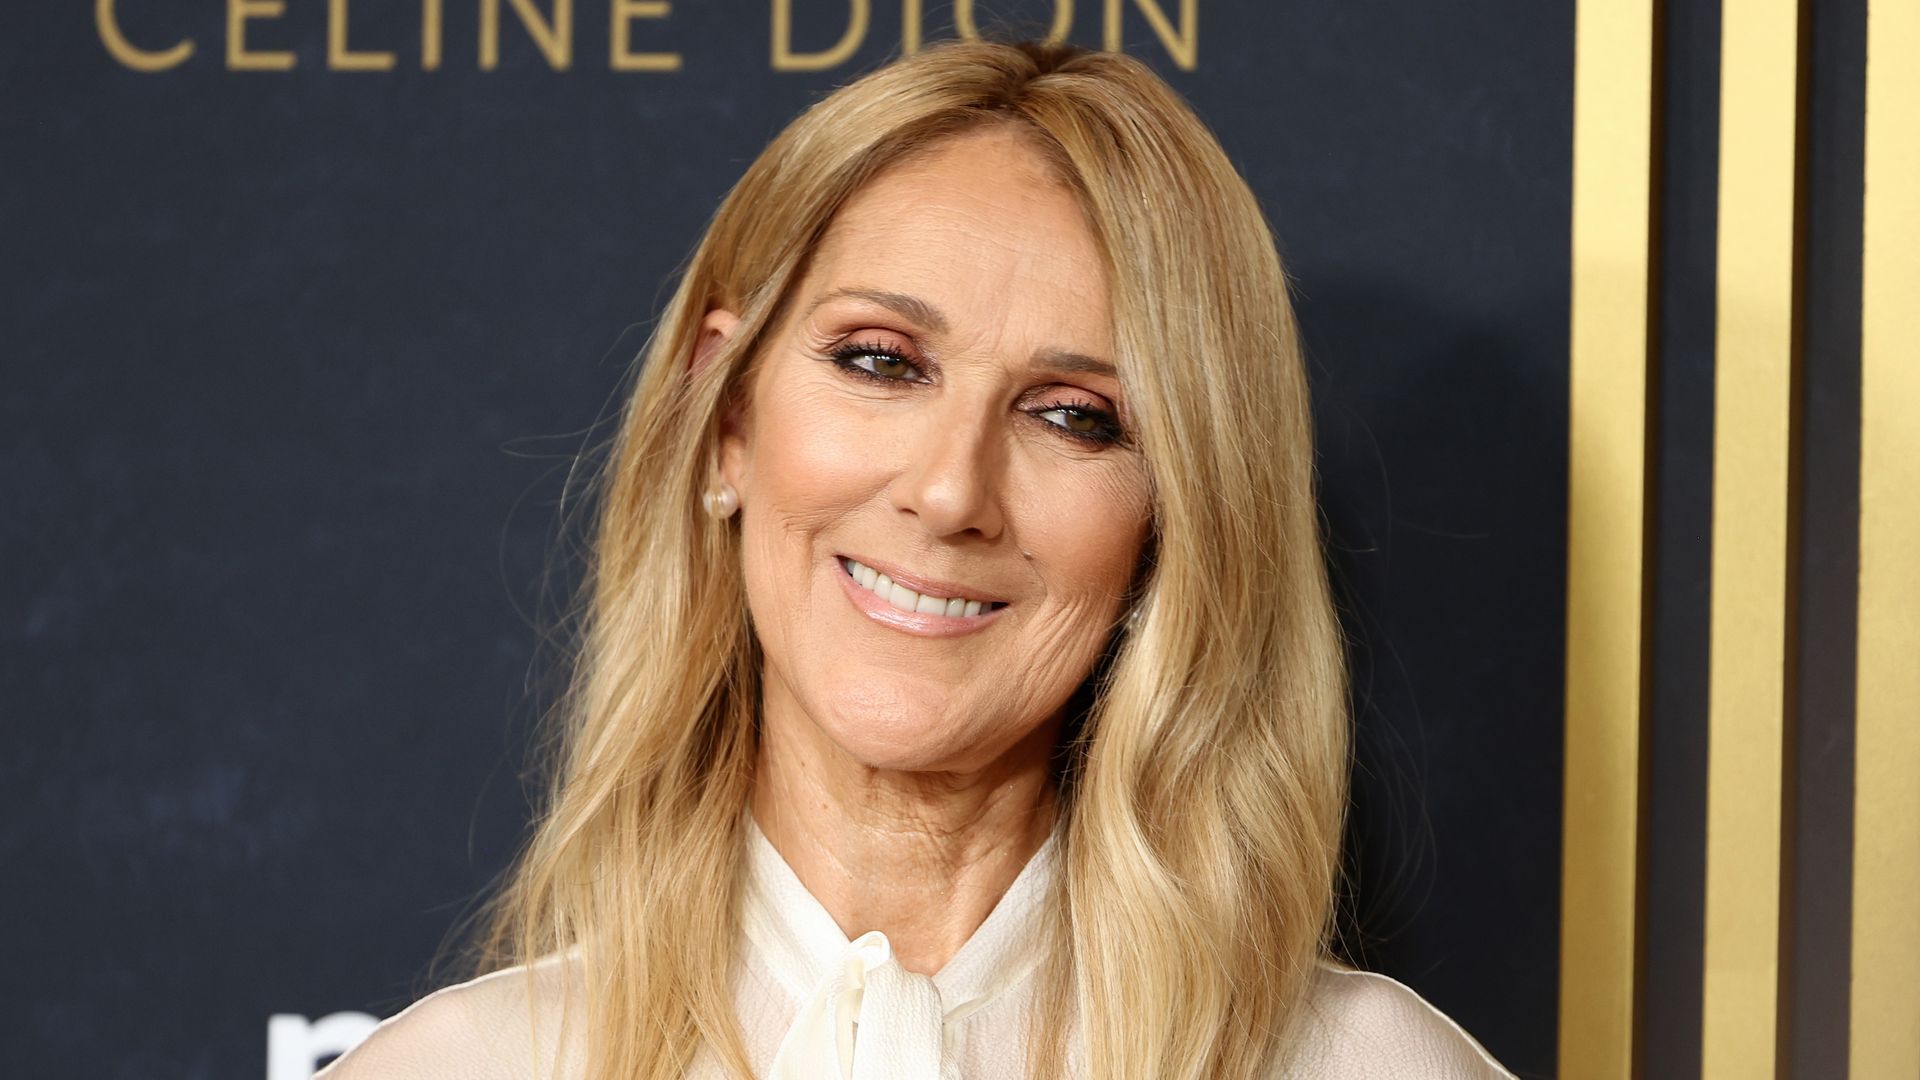 Celine Dion shows terrifying health scare: 'I don’t know how to express it'